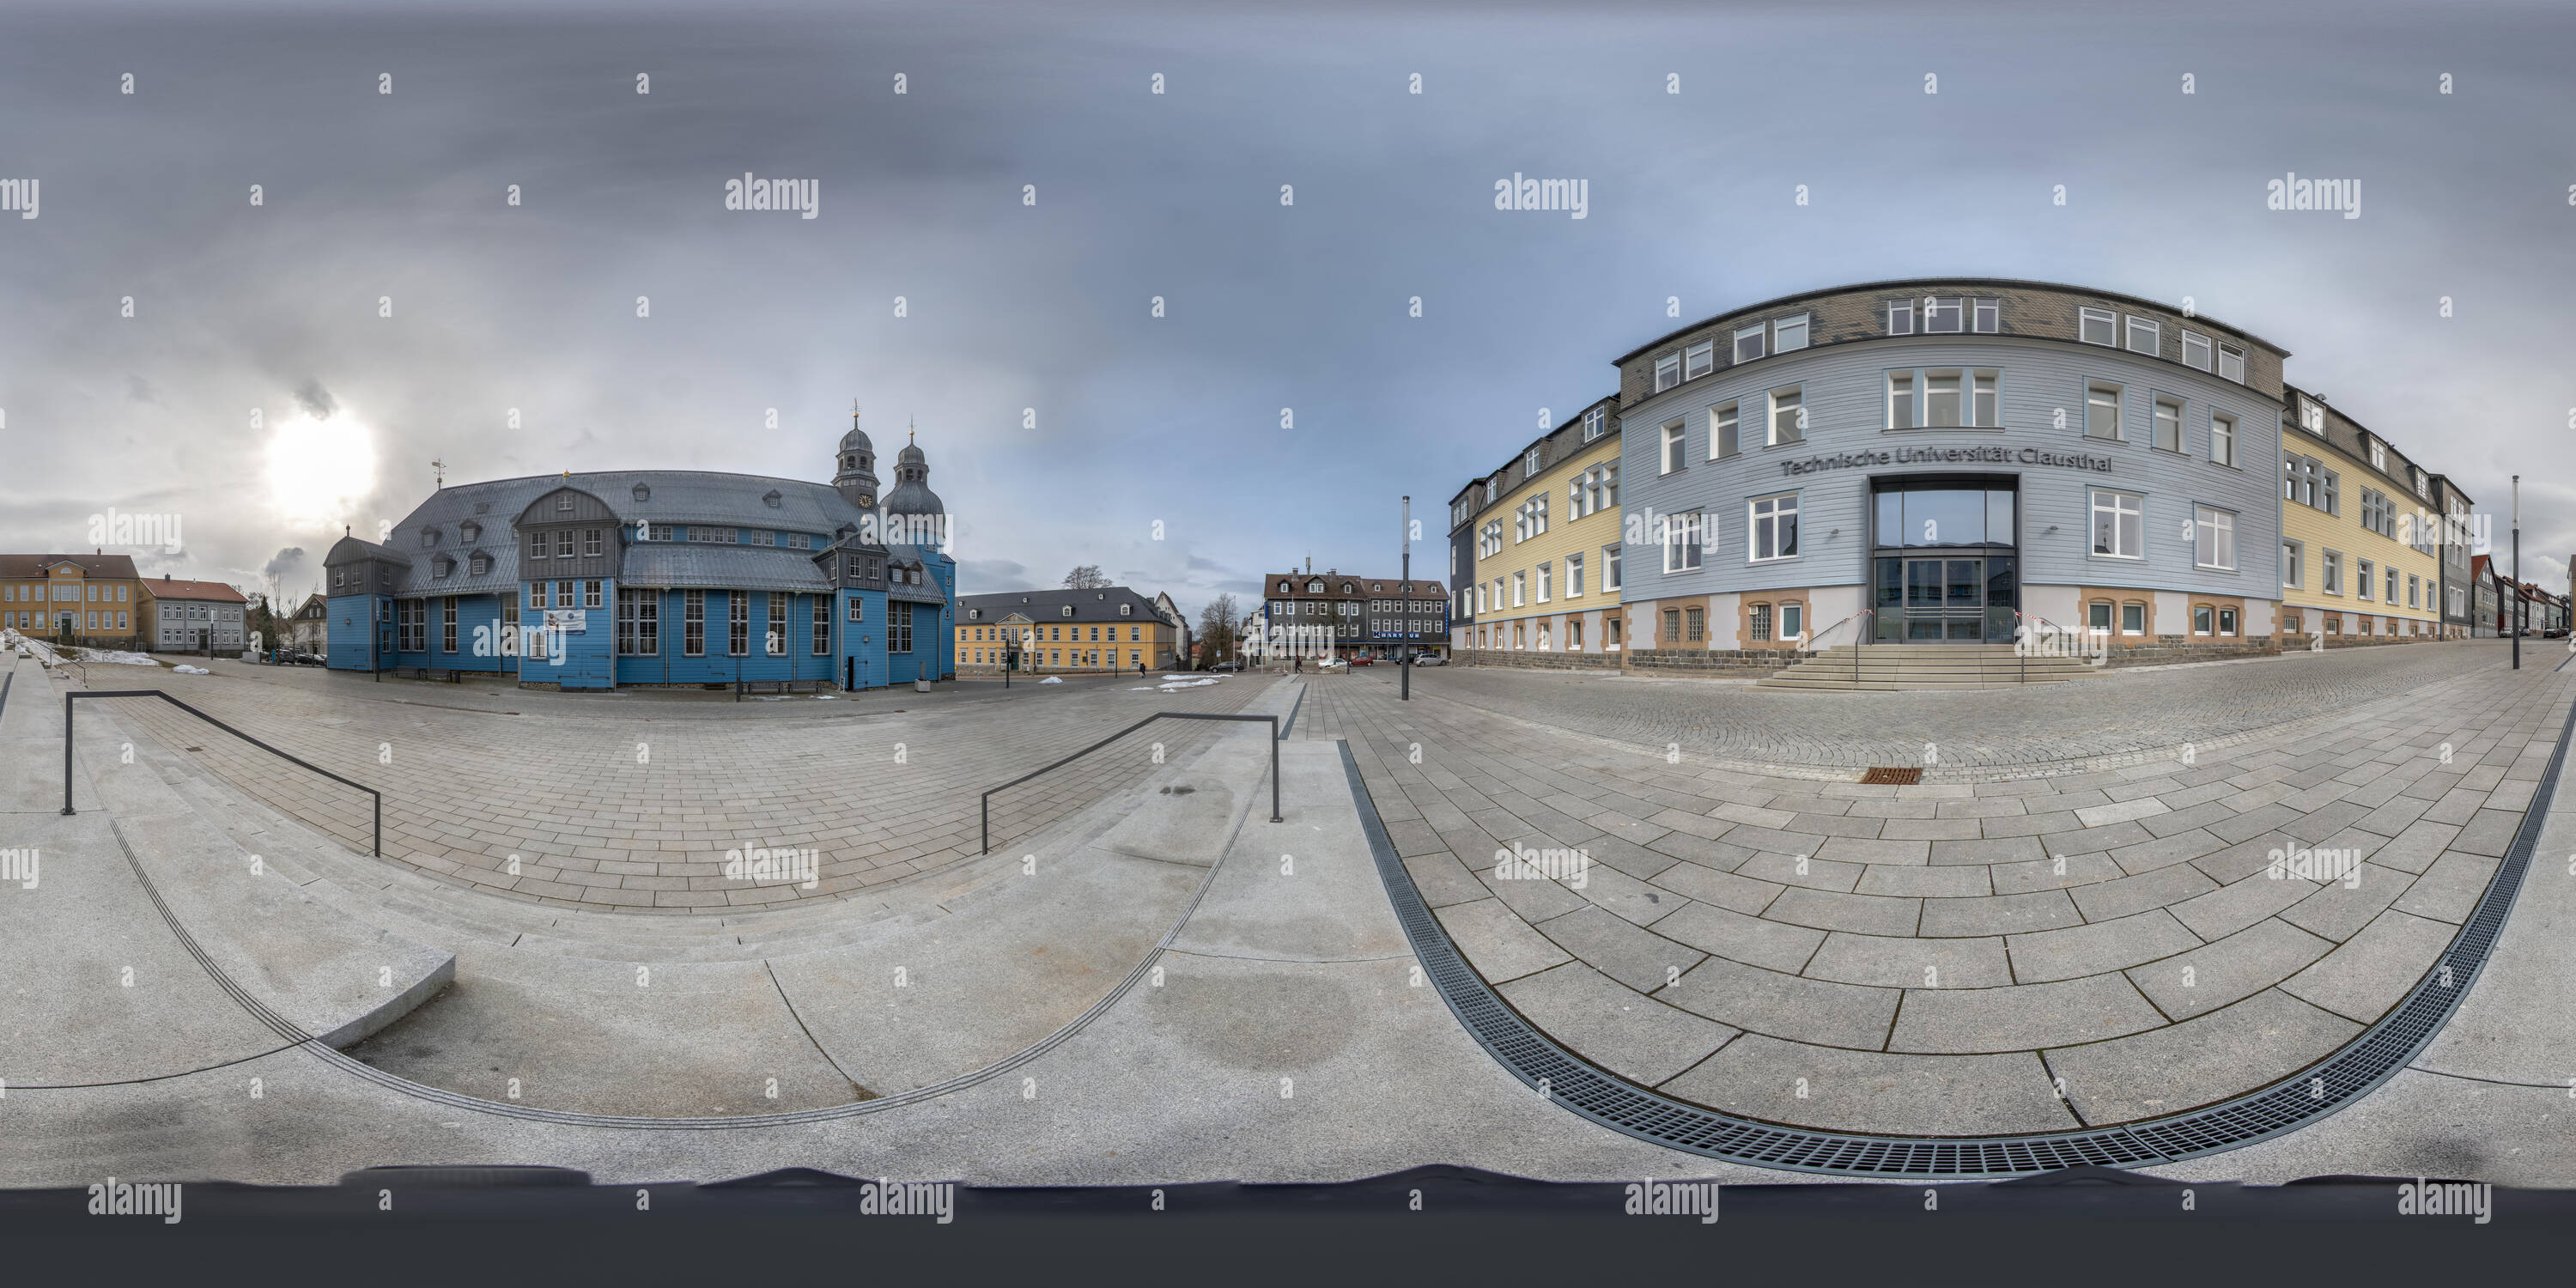 360 degree panoramic view of Clausthal-Zellerfeld, Germany, February 20, 2019: Center with the blue wooden church and the entrance of the main building of the Technical University